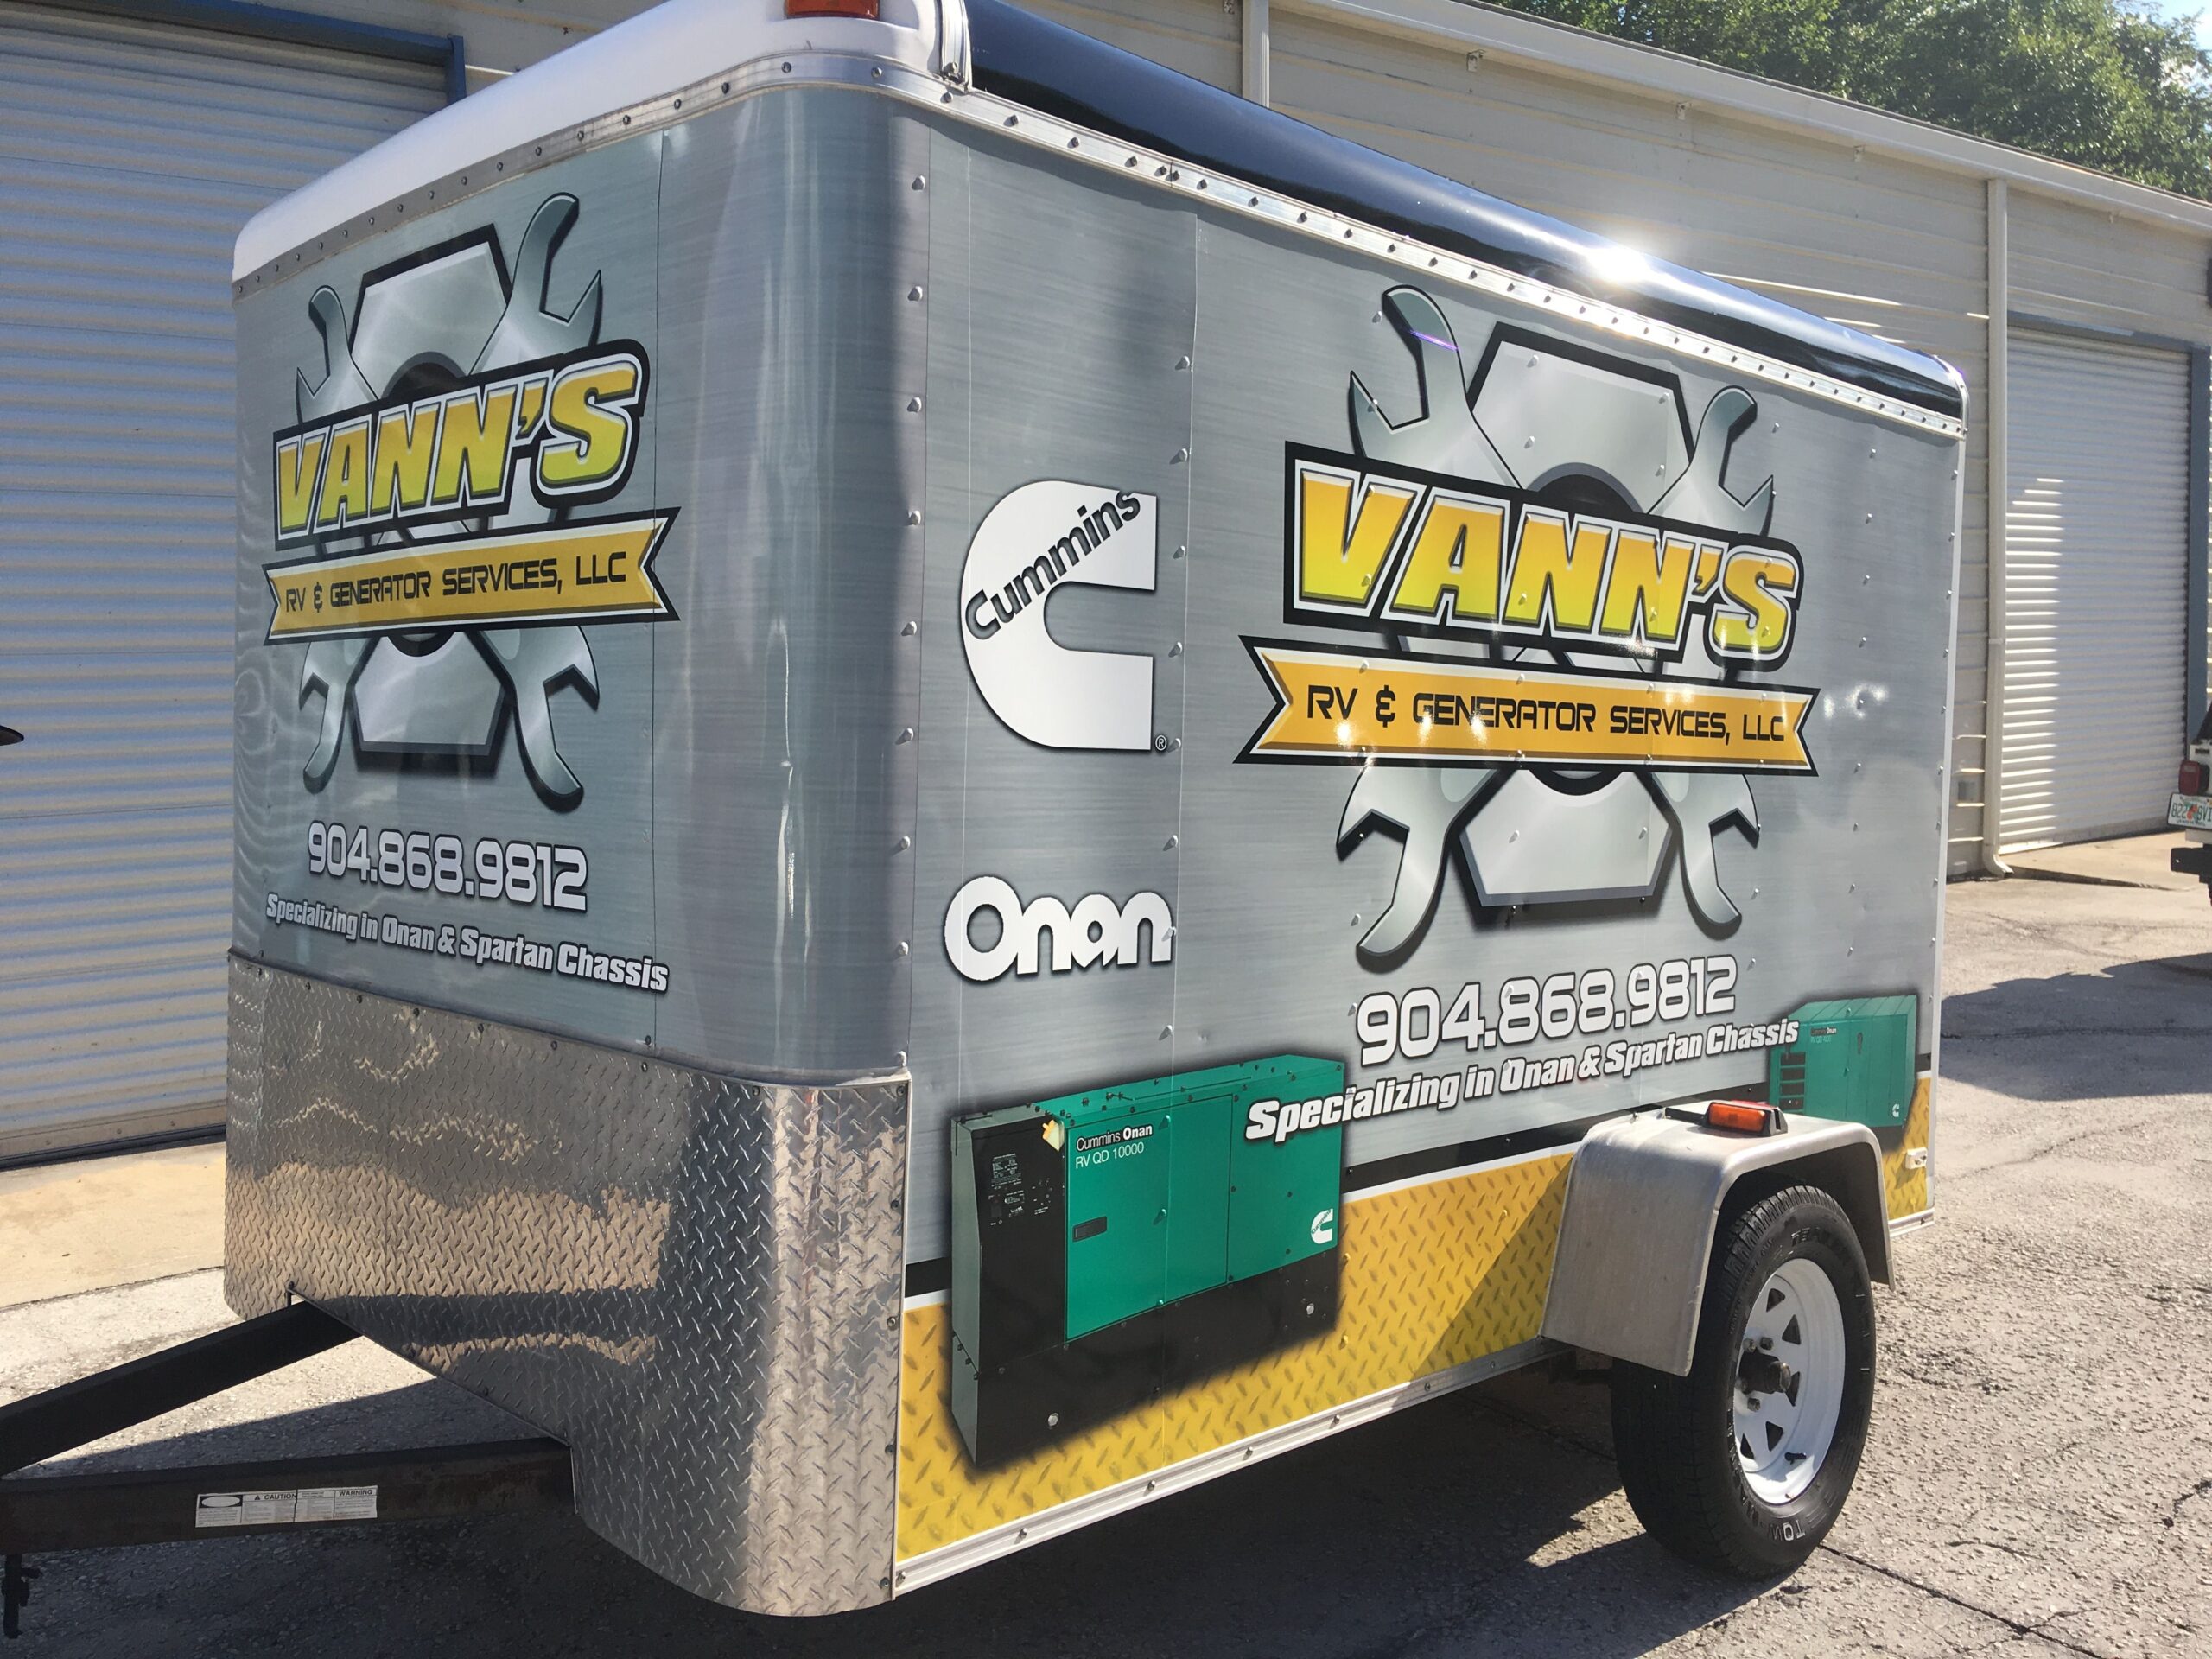 Small commercial one-wheel generator trailer, wrapped in a customized grey, yellow, and green glossy vinyl trailer wrap. Customized generator trailer wrap for "Vann's" wrapped by Wraps Direct in Jacksonville Florida.